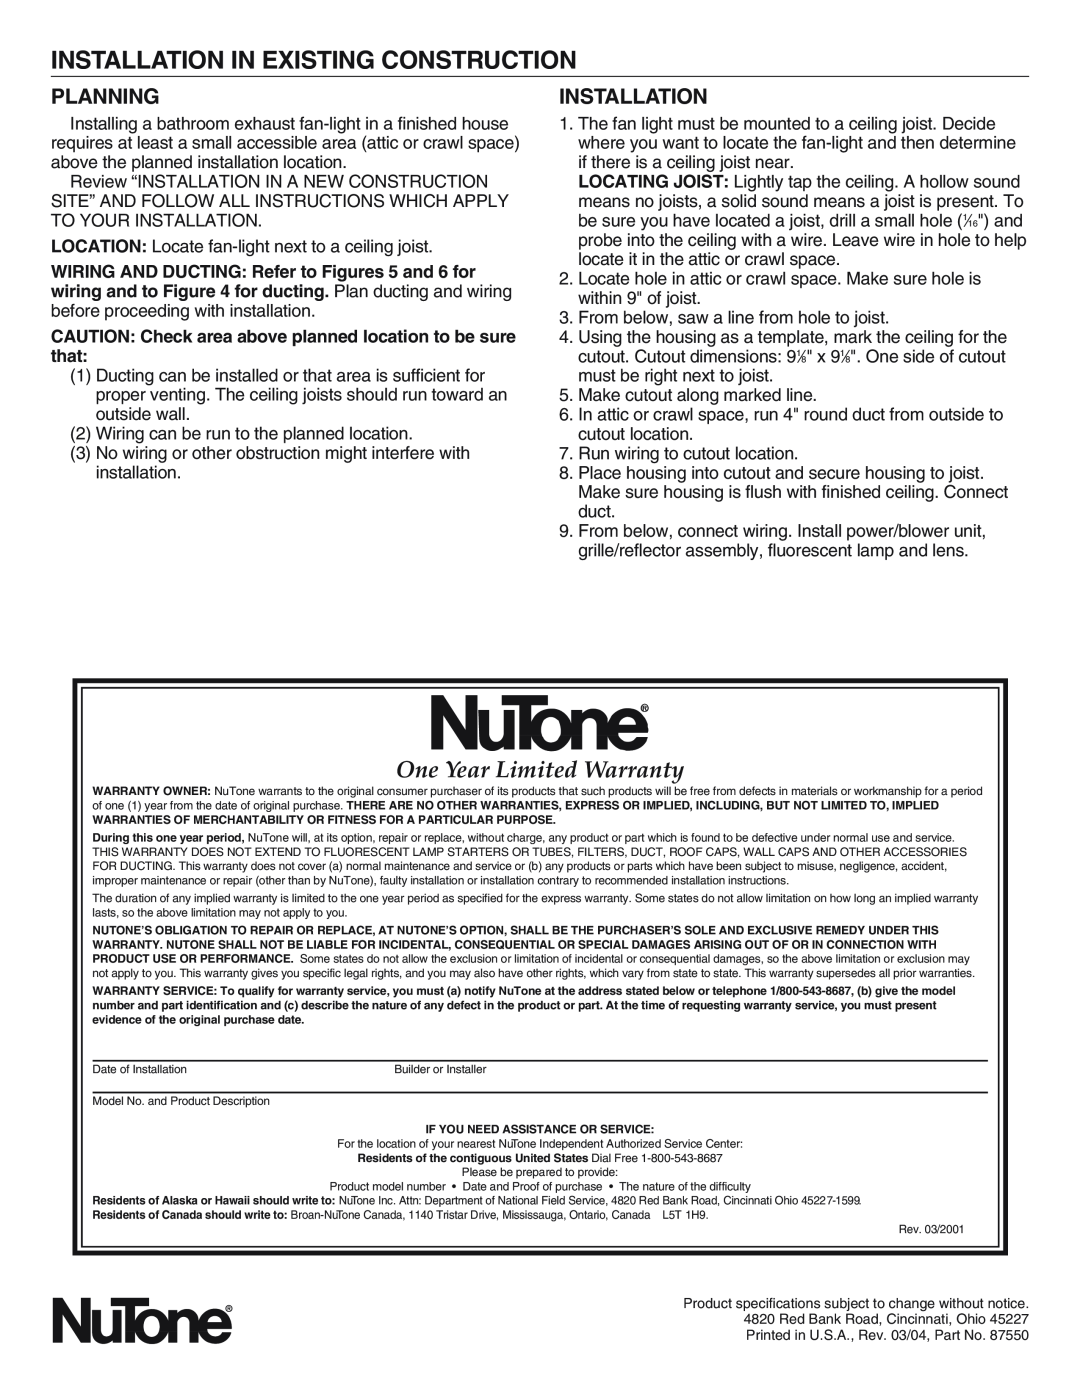 NuTone 769RF installation instructions Installation In Existing Construction, One Year Limited Warranty, Planning 